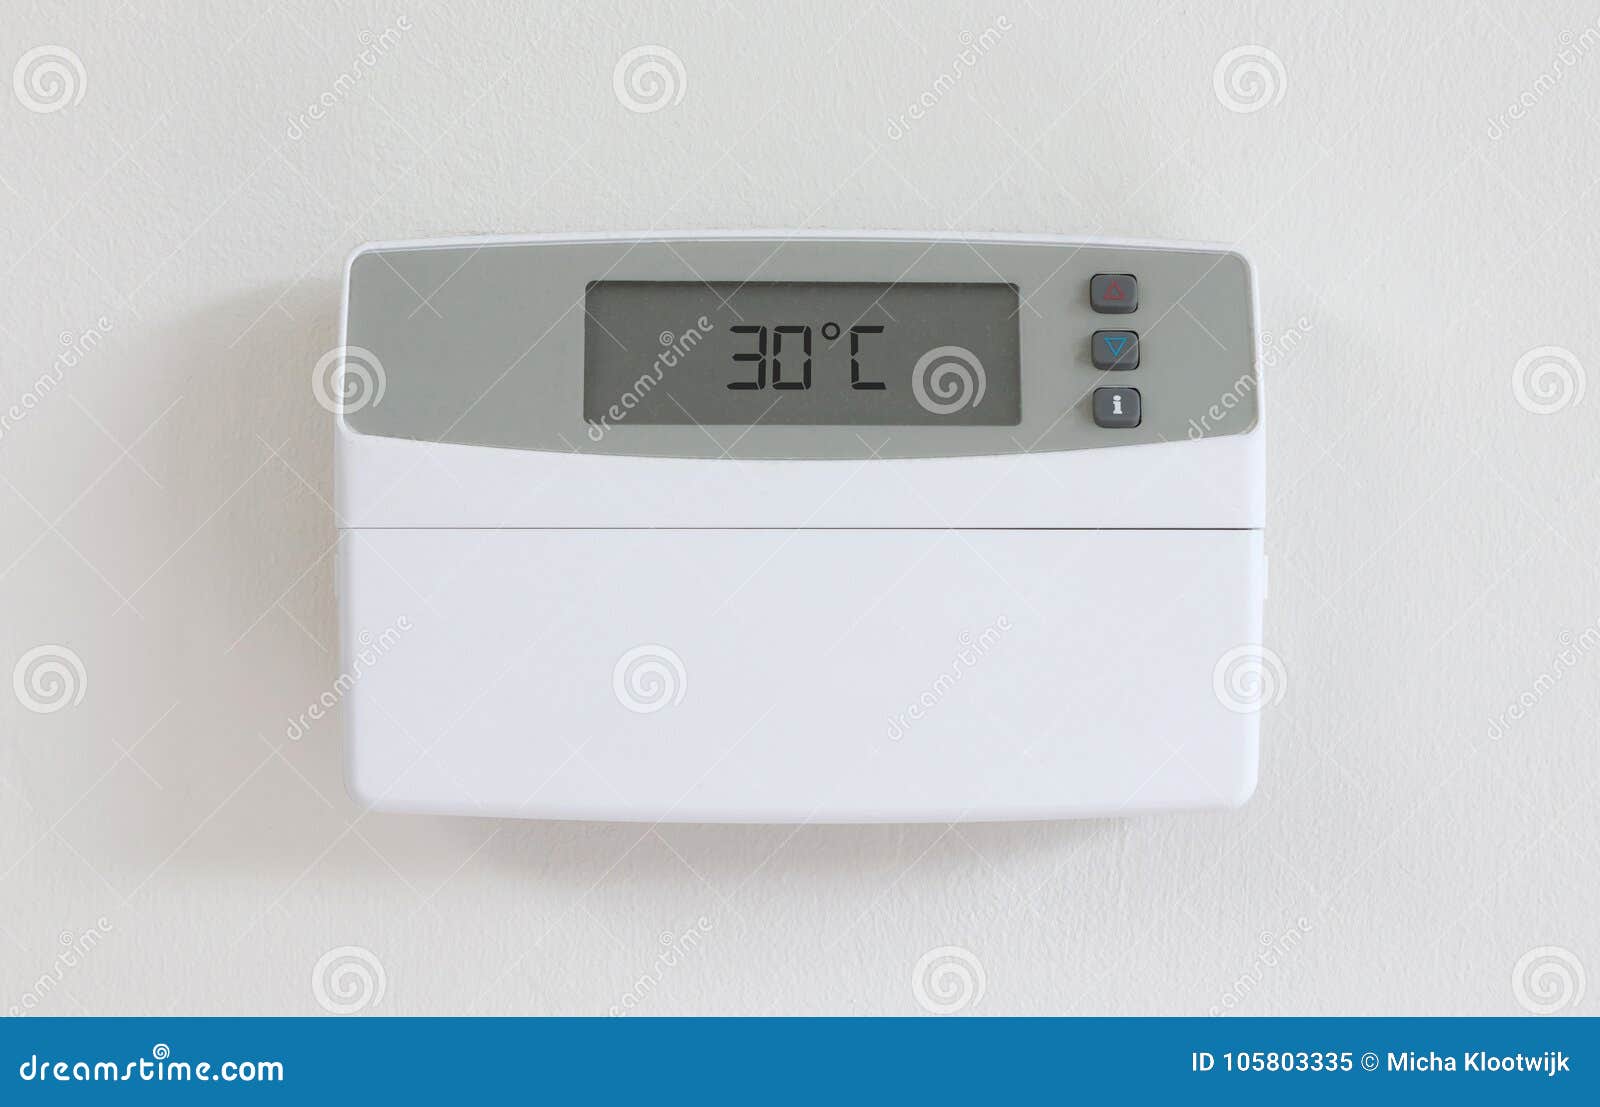 vintage digital thermostat - covert in dust - 30 degrees celcius